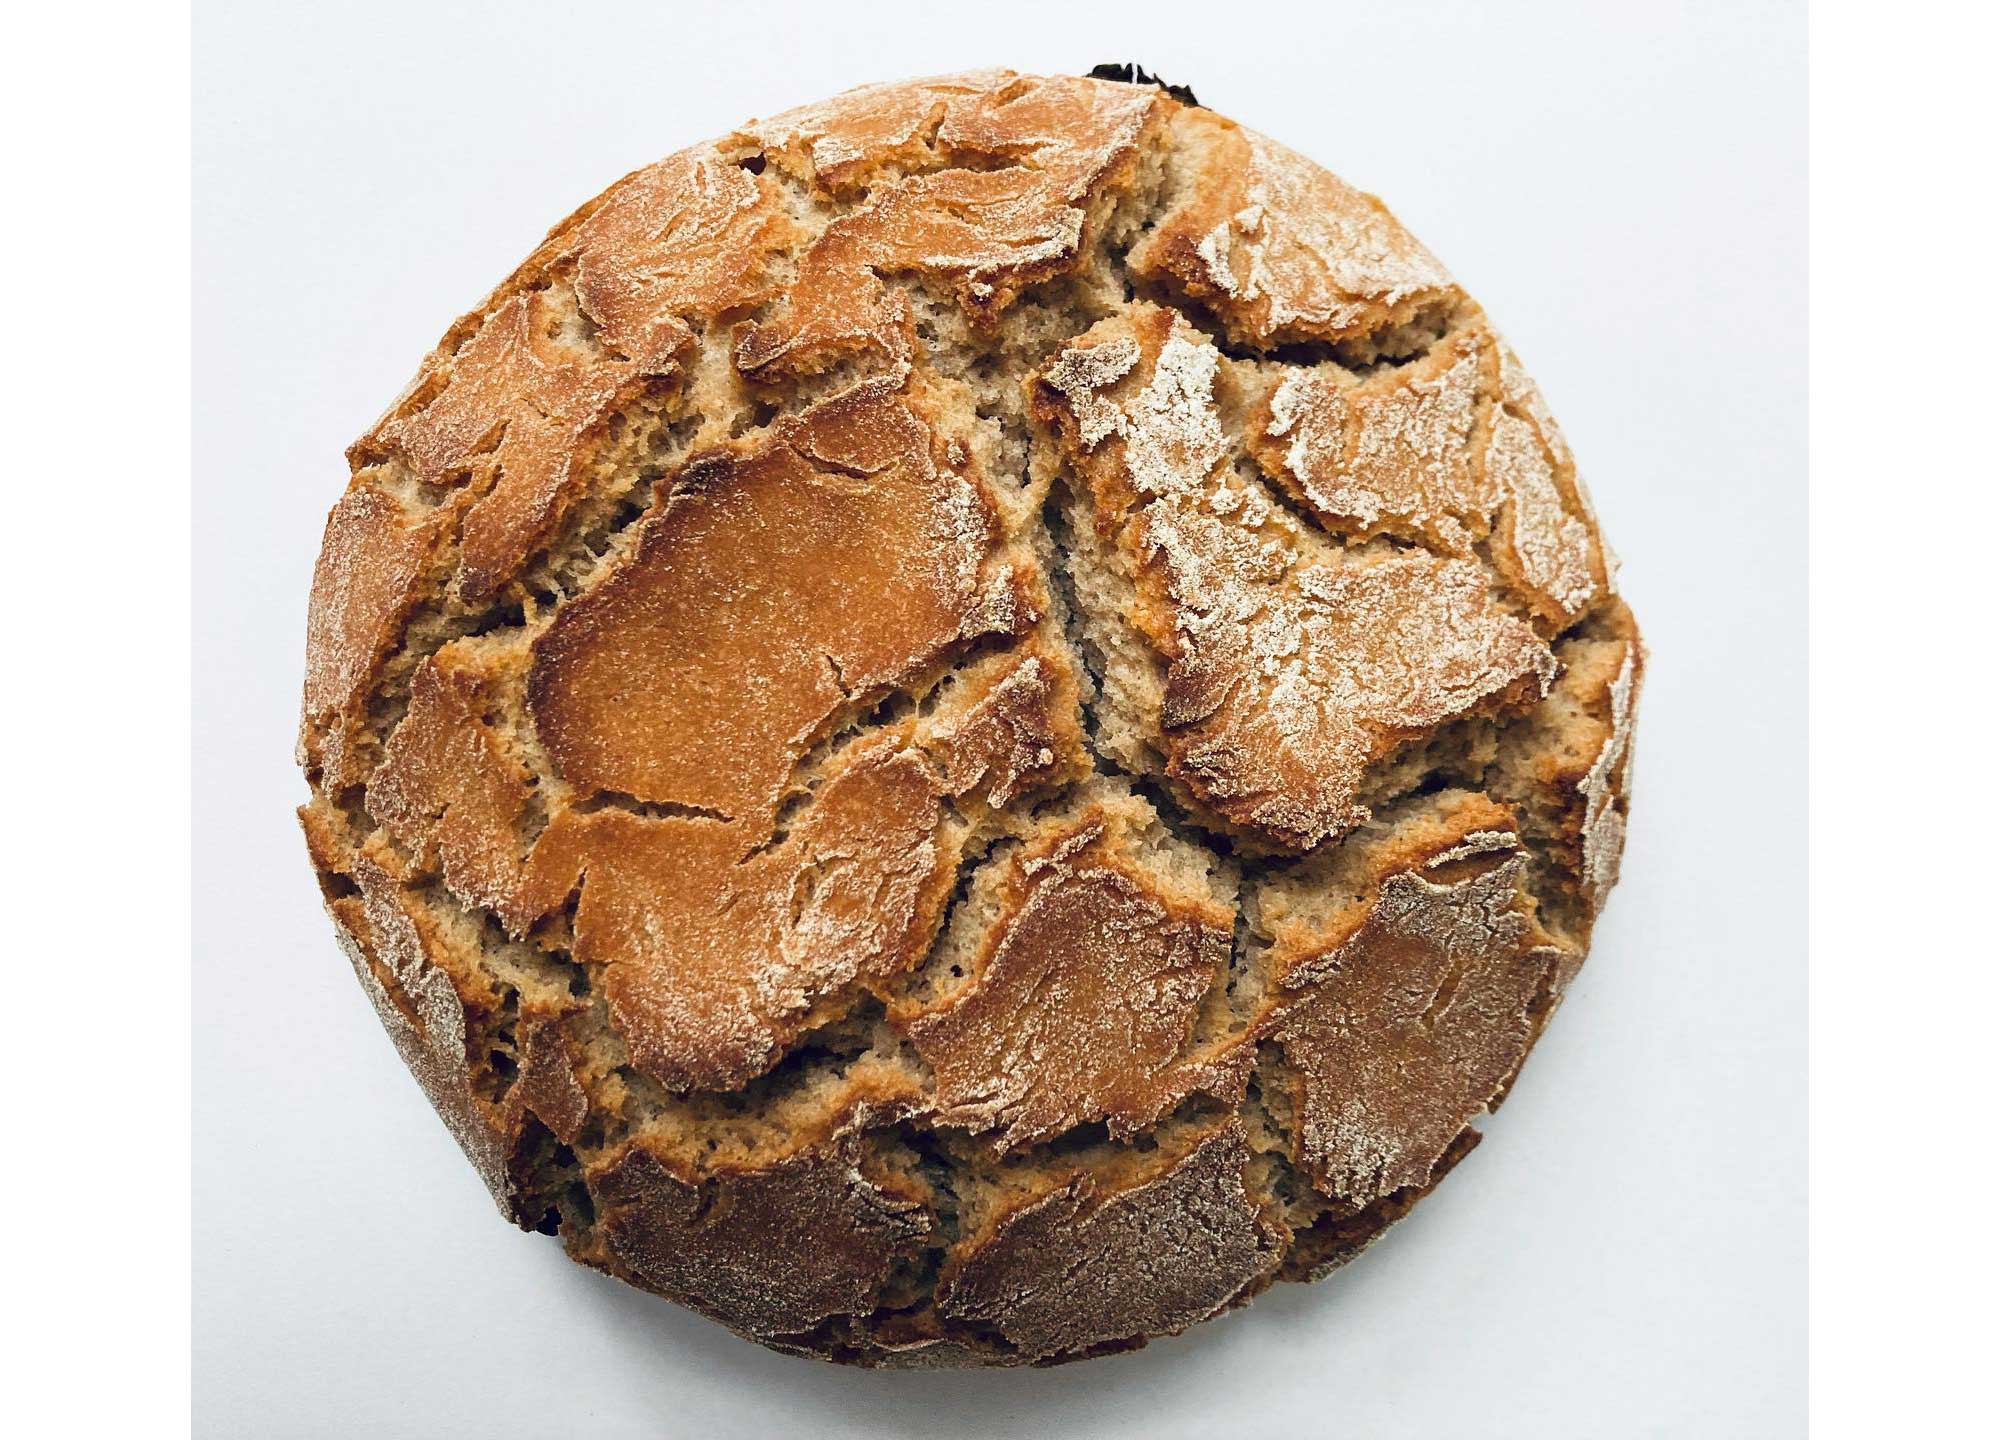 Photograph of cornbread from the Iberian Peninsula. The photo shows a round loaf of bread from above. The bread has a cracked brown crust.